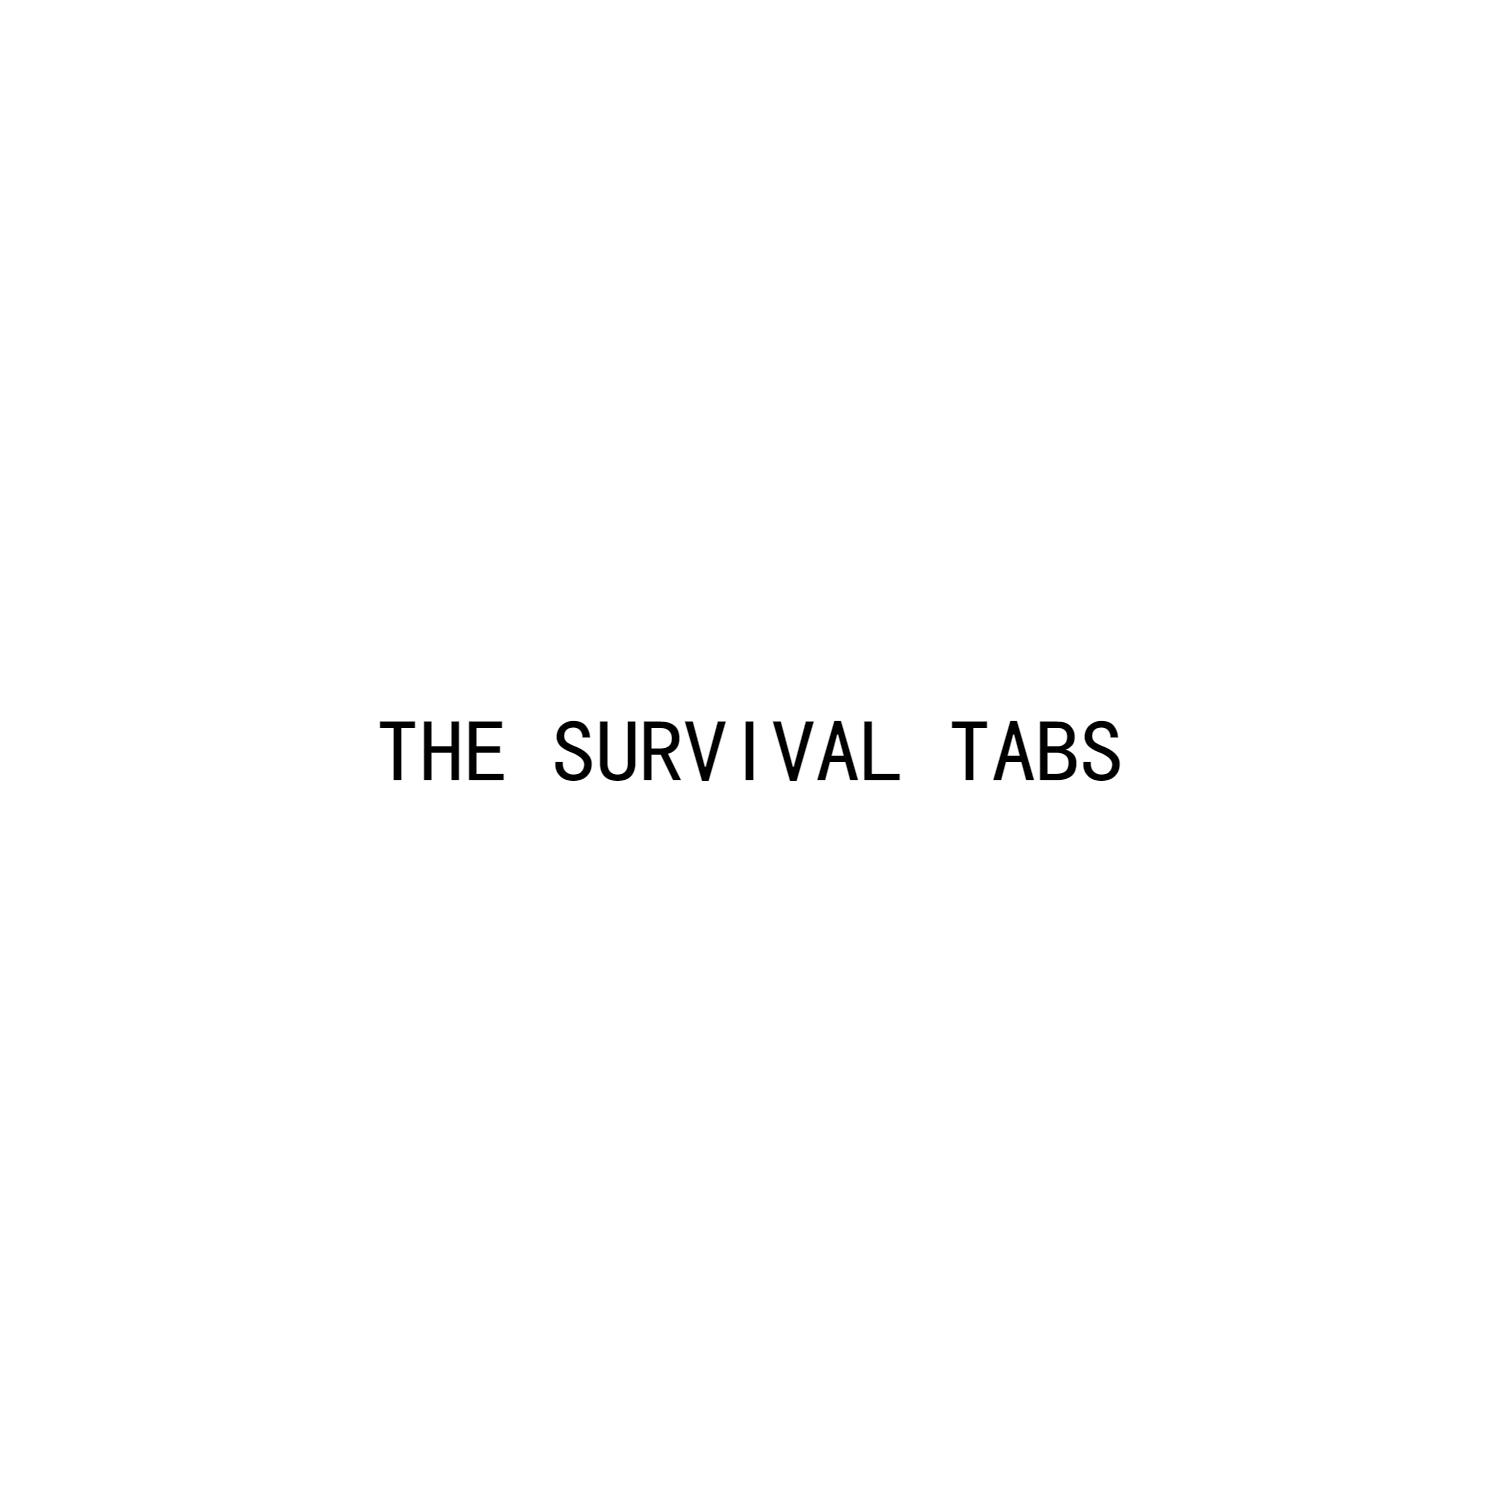 THE SURVIVAL TABS